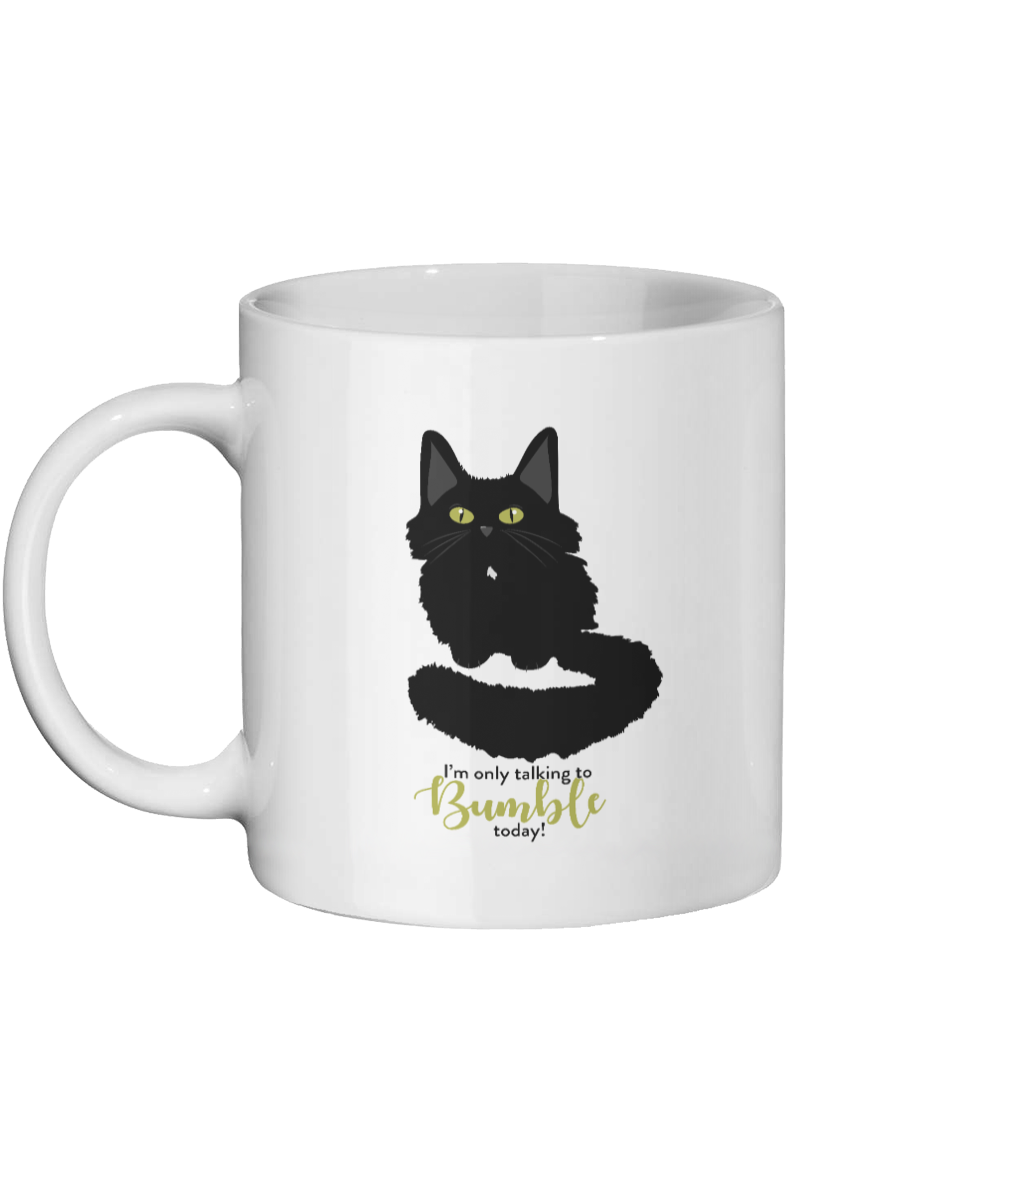 Personalise Your Own Ceramic Mug - example Bumble